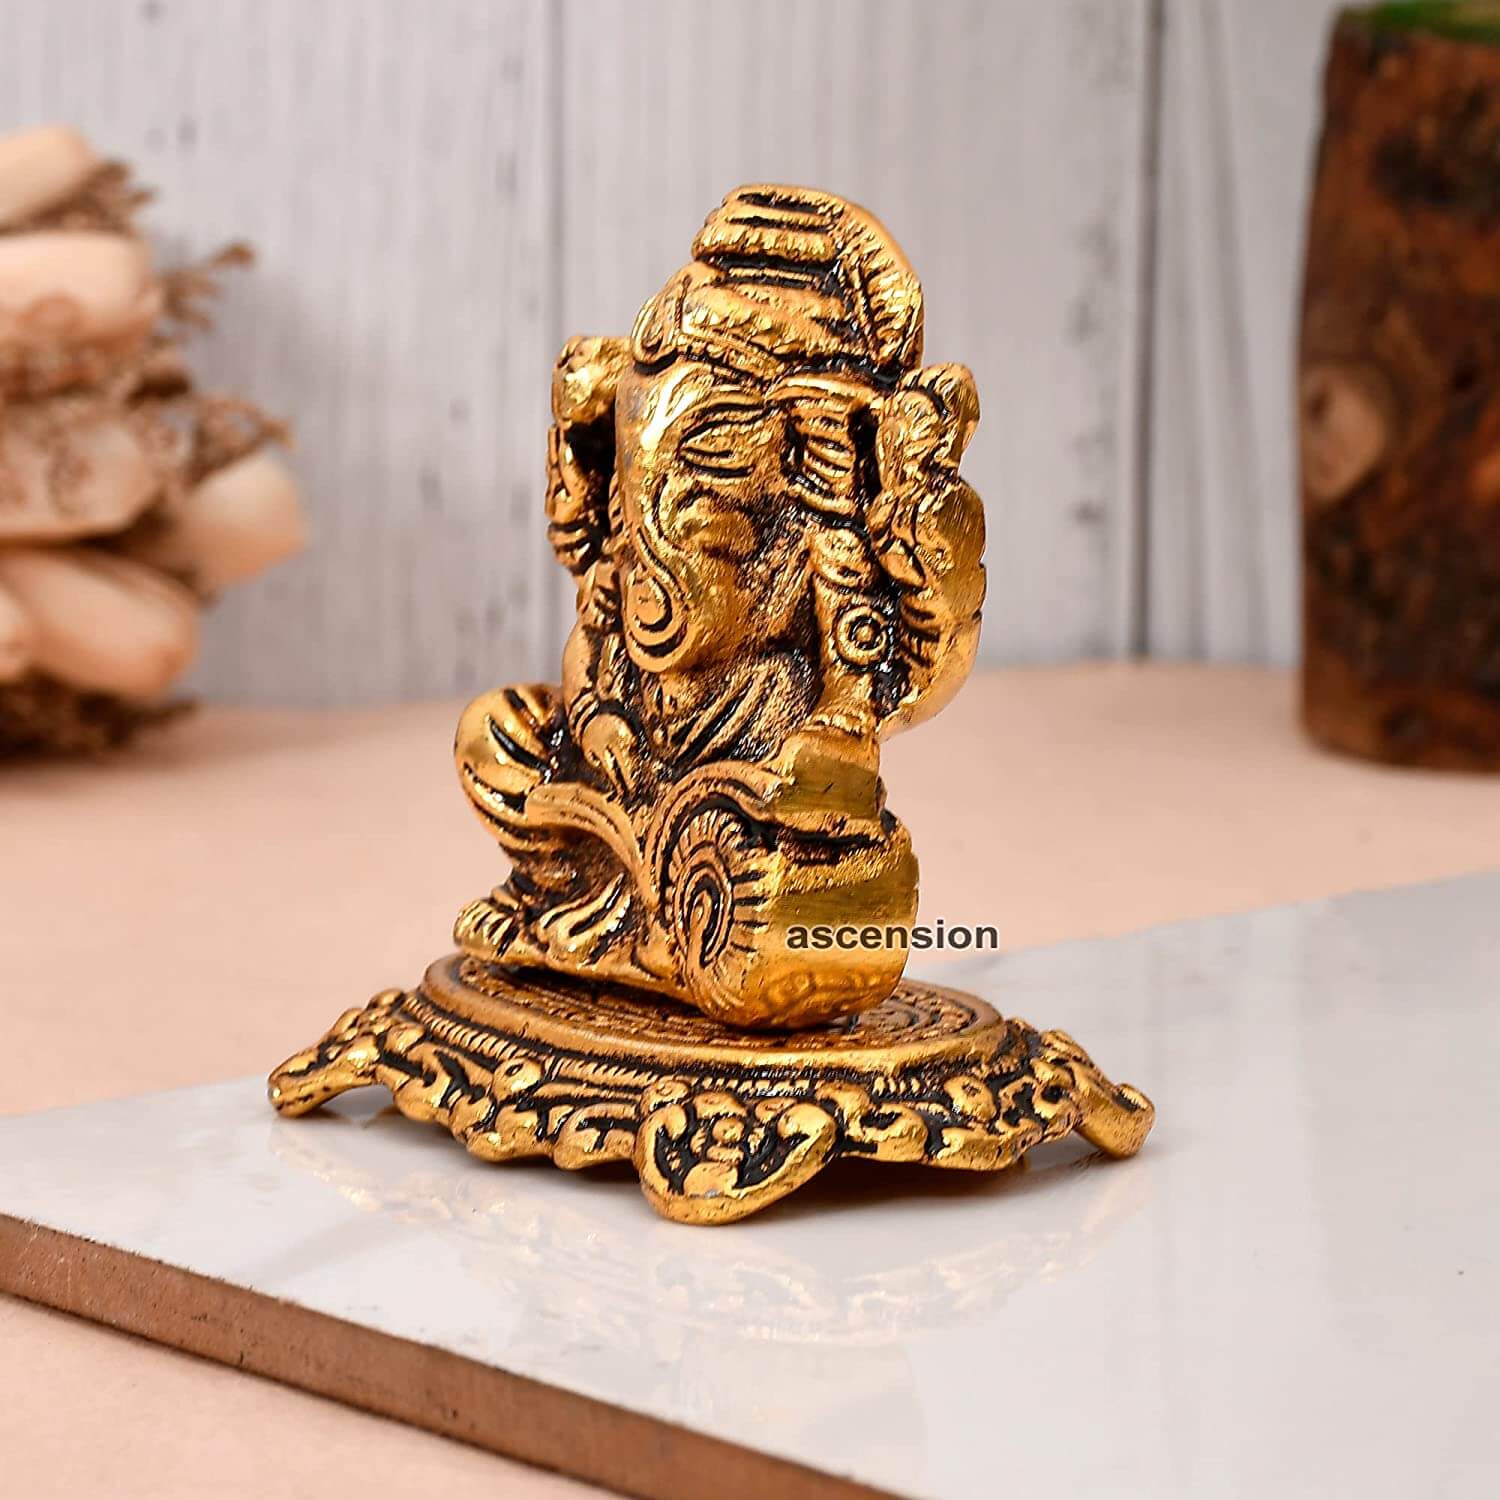 Buy DreamKraft Metal Ganesh Idol Showpiece for Home Décor and Gift  Purpose(15.5x19.5x11 CM) Online at Low Prices in India - Amazon.in